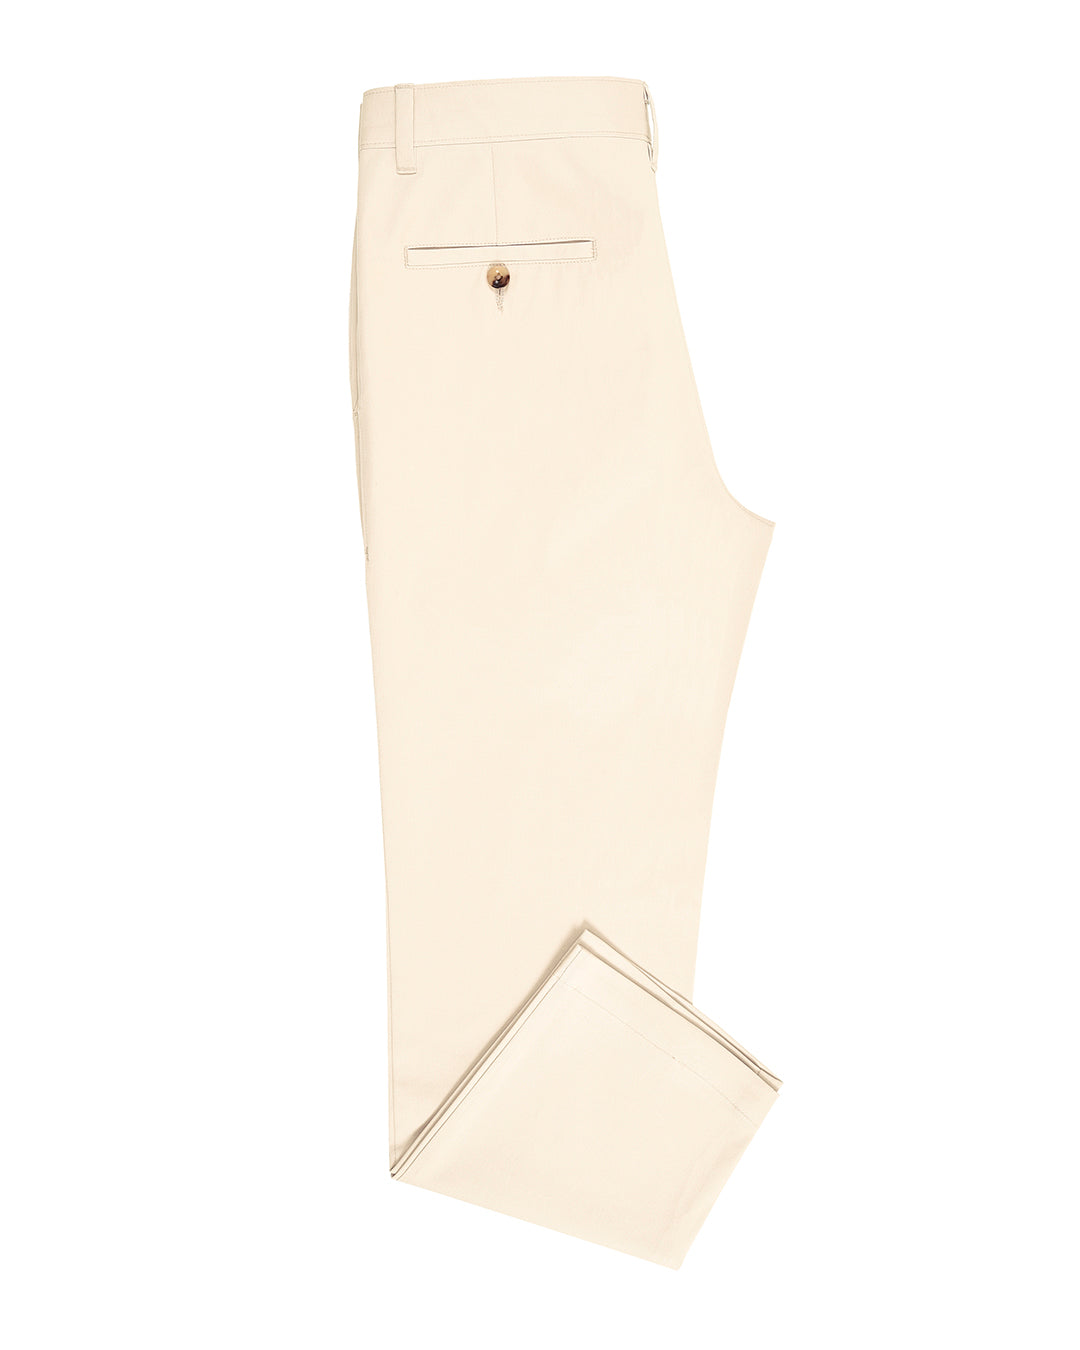 Side view of custom Genoa Chino pants for men by Luxire in ivory cream